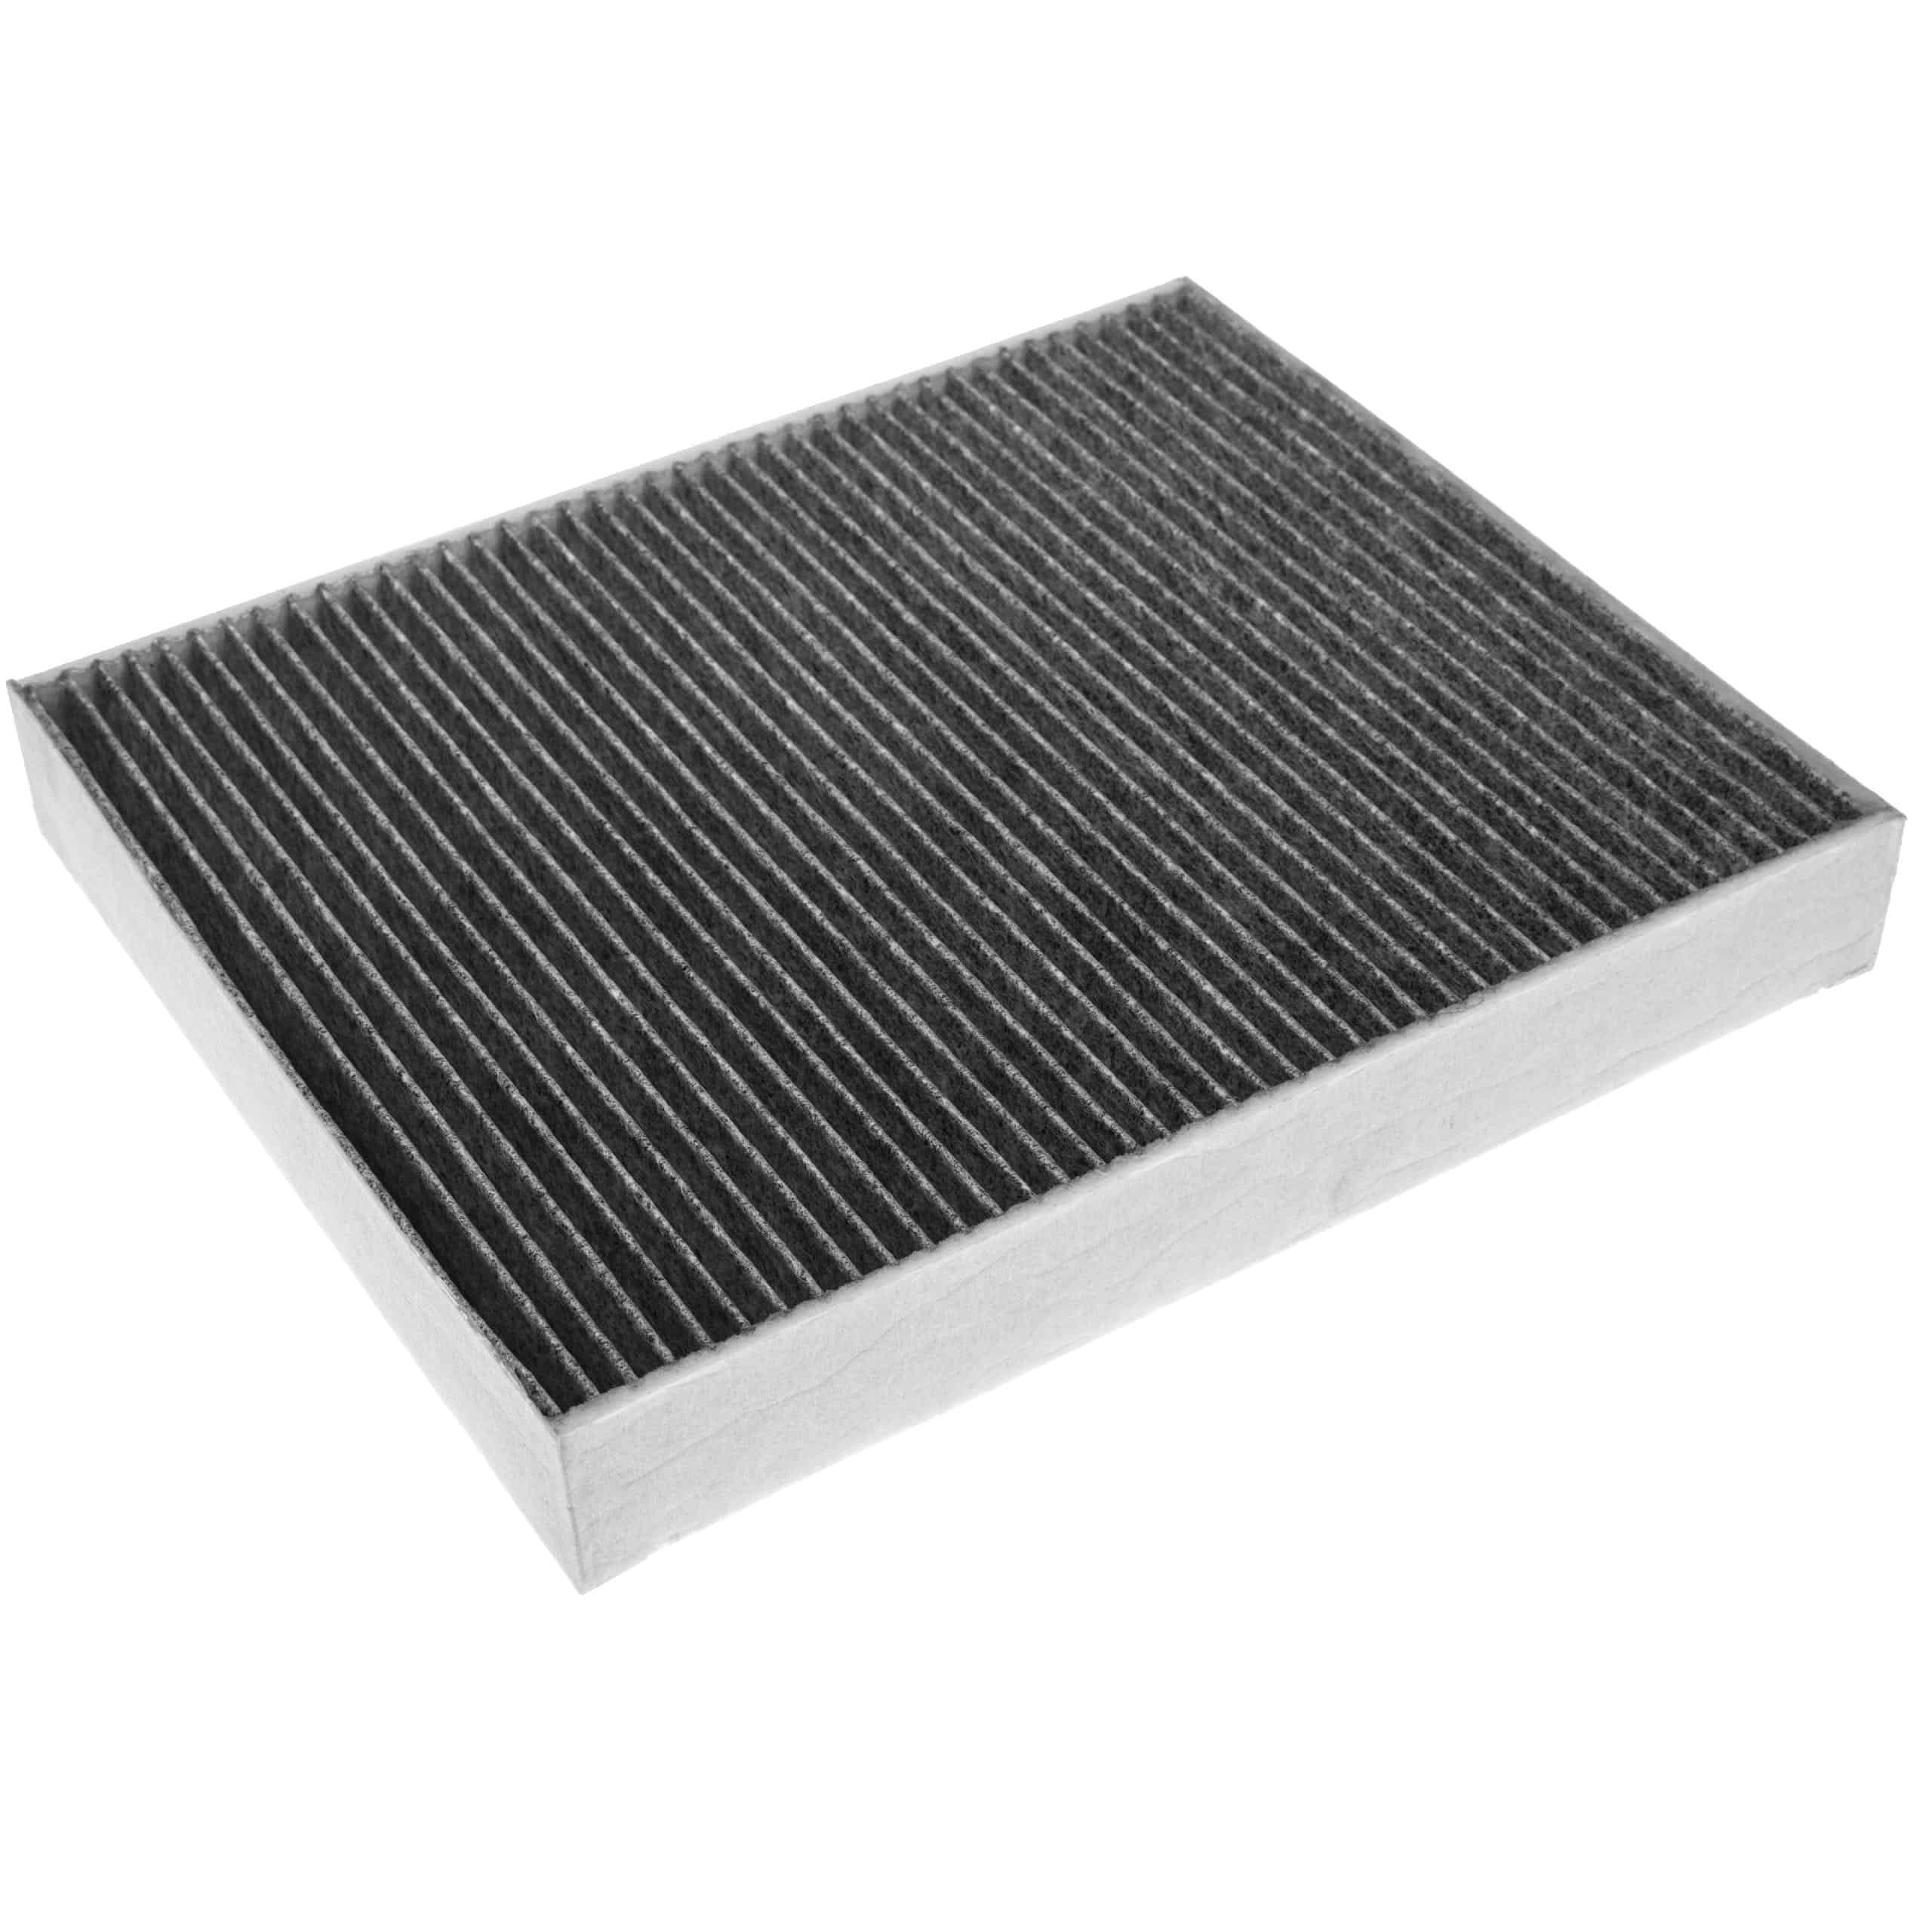 Filter as Replacement for Stadler Form R-114 - HEPA (H12) + Activated Carbon, 32.4 x 27 x 4.35 cm